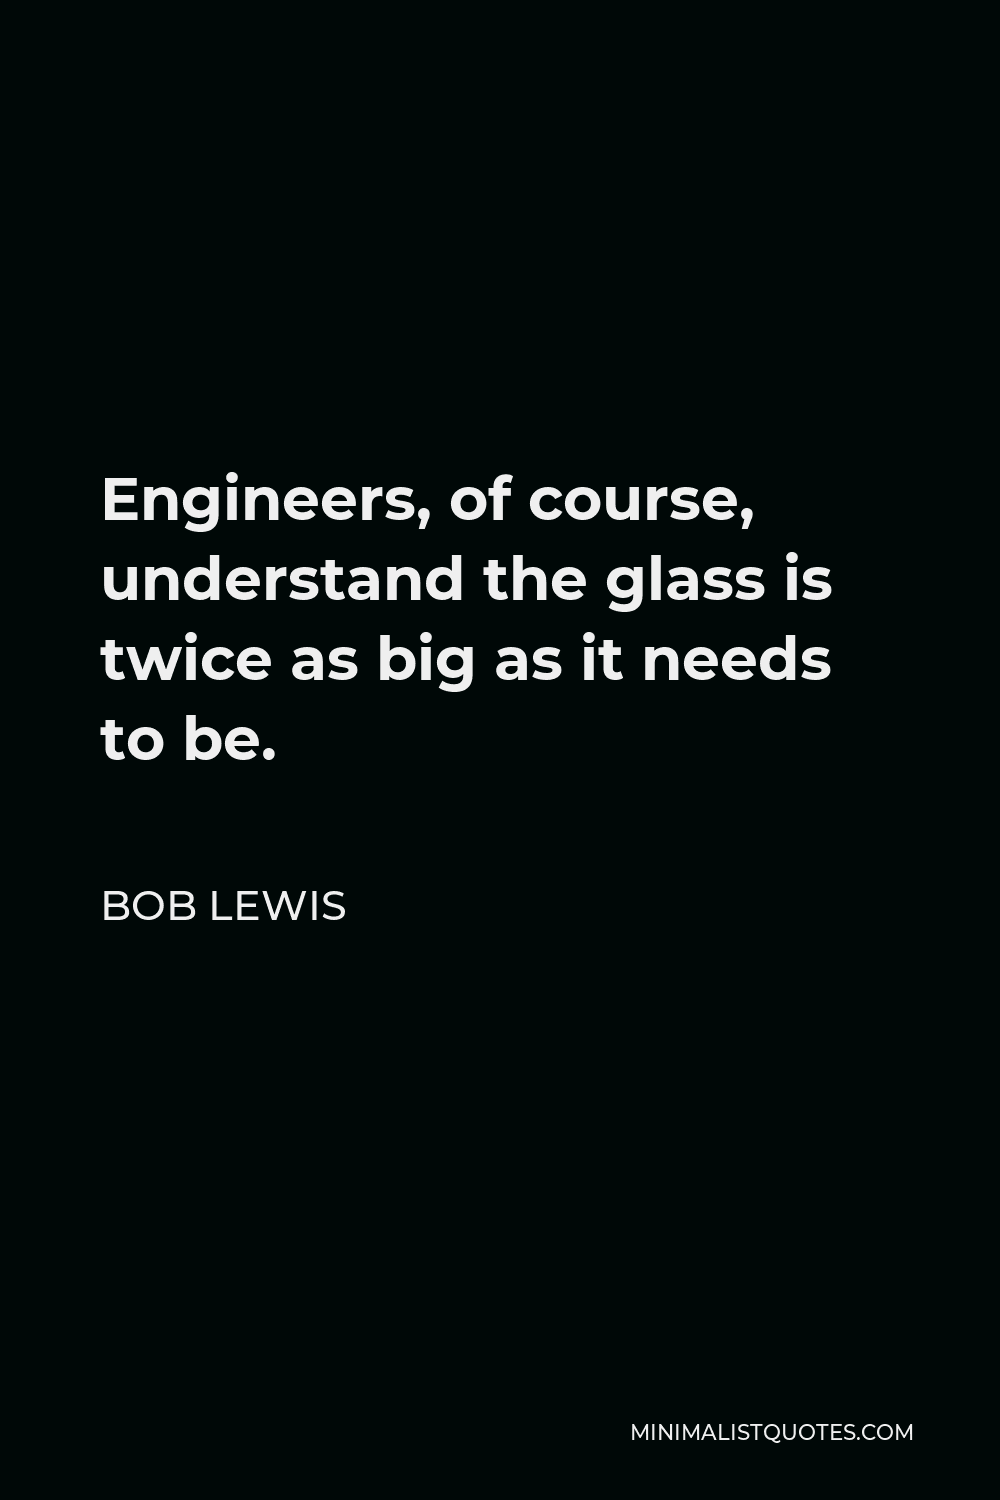 Bob Lewis Quote - Engineers, of course, understand the glass is twice as big as it needs to be.